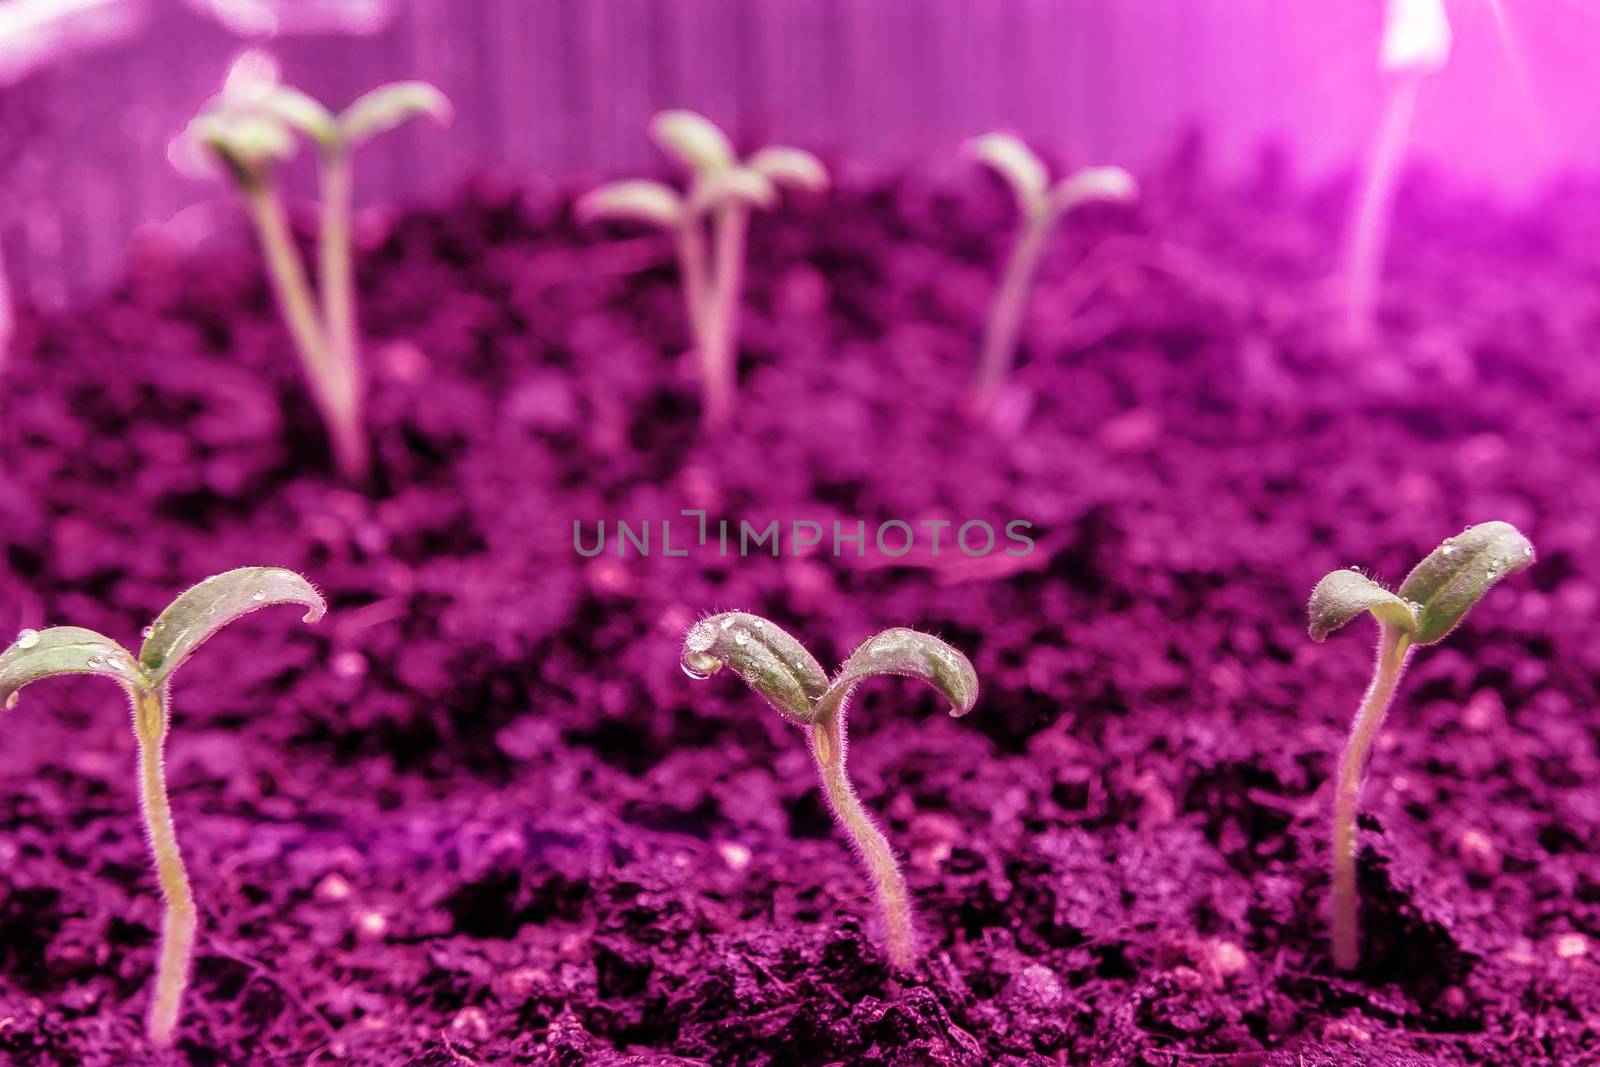 Growing seedlings under special artificial LED lamps with a spectrum favorable for plants without sunlight by galsand